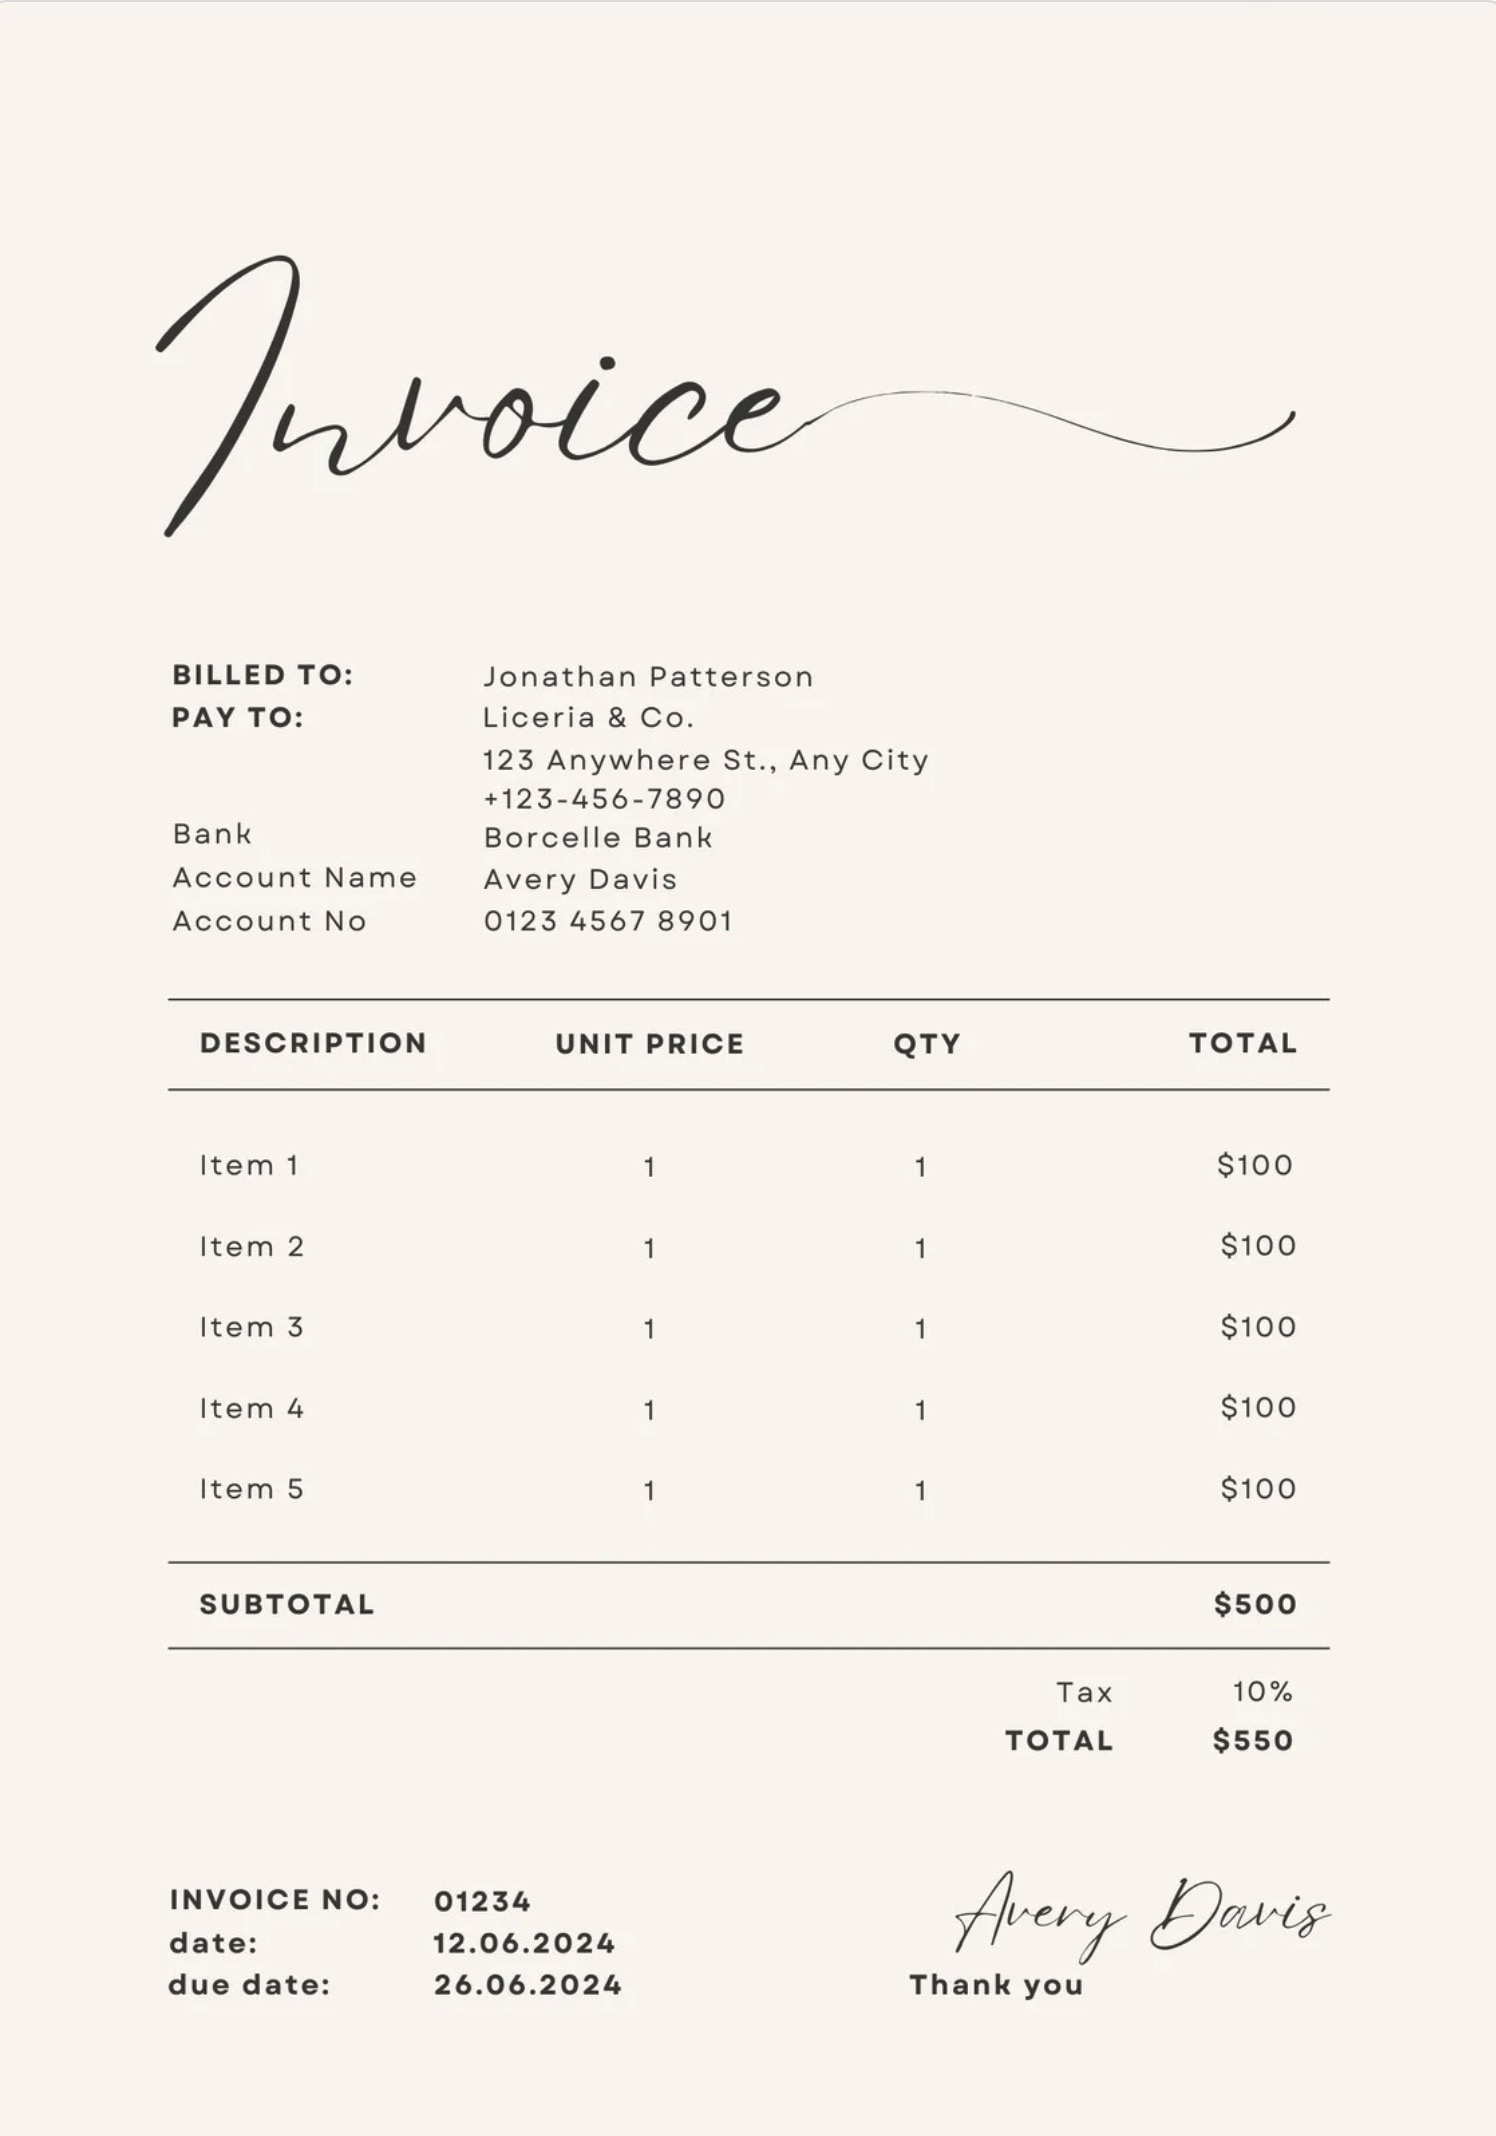 An invoice with a handwritten calligraphy.